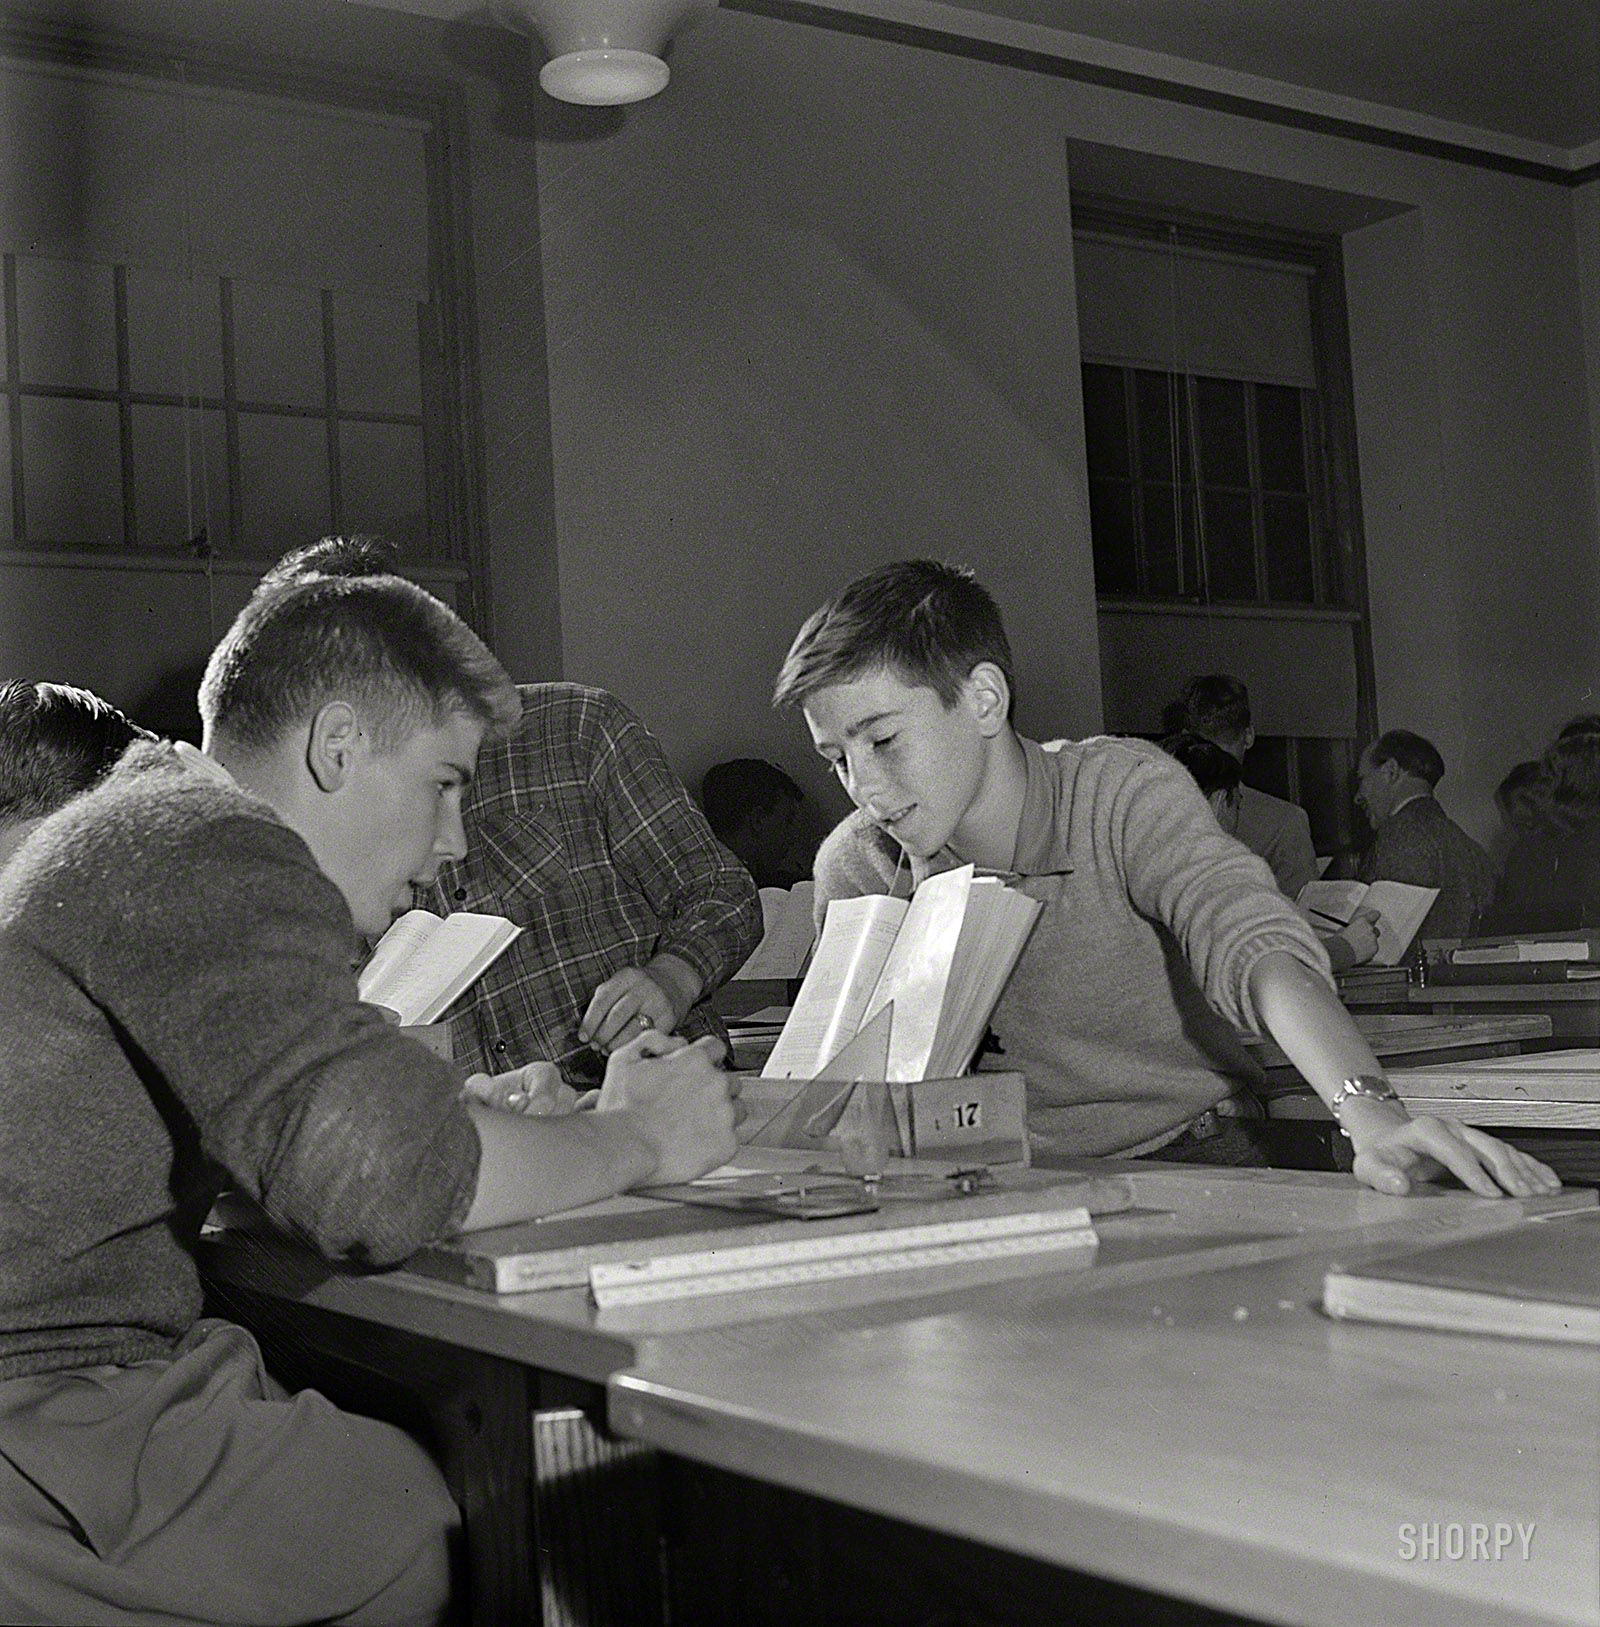 October 1943. Washington, D.C. "A mechanical drawing class at Woodrow Wilson High School." The Popular Girls making themselves scarce. Photo by Esther Bubley for the Office of War Information. View full size.
